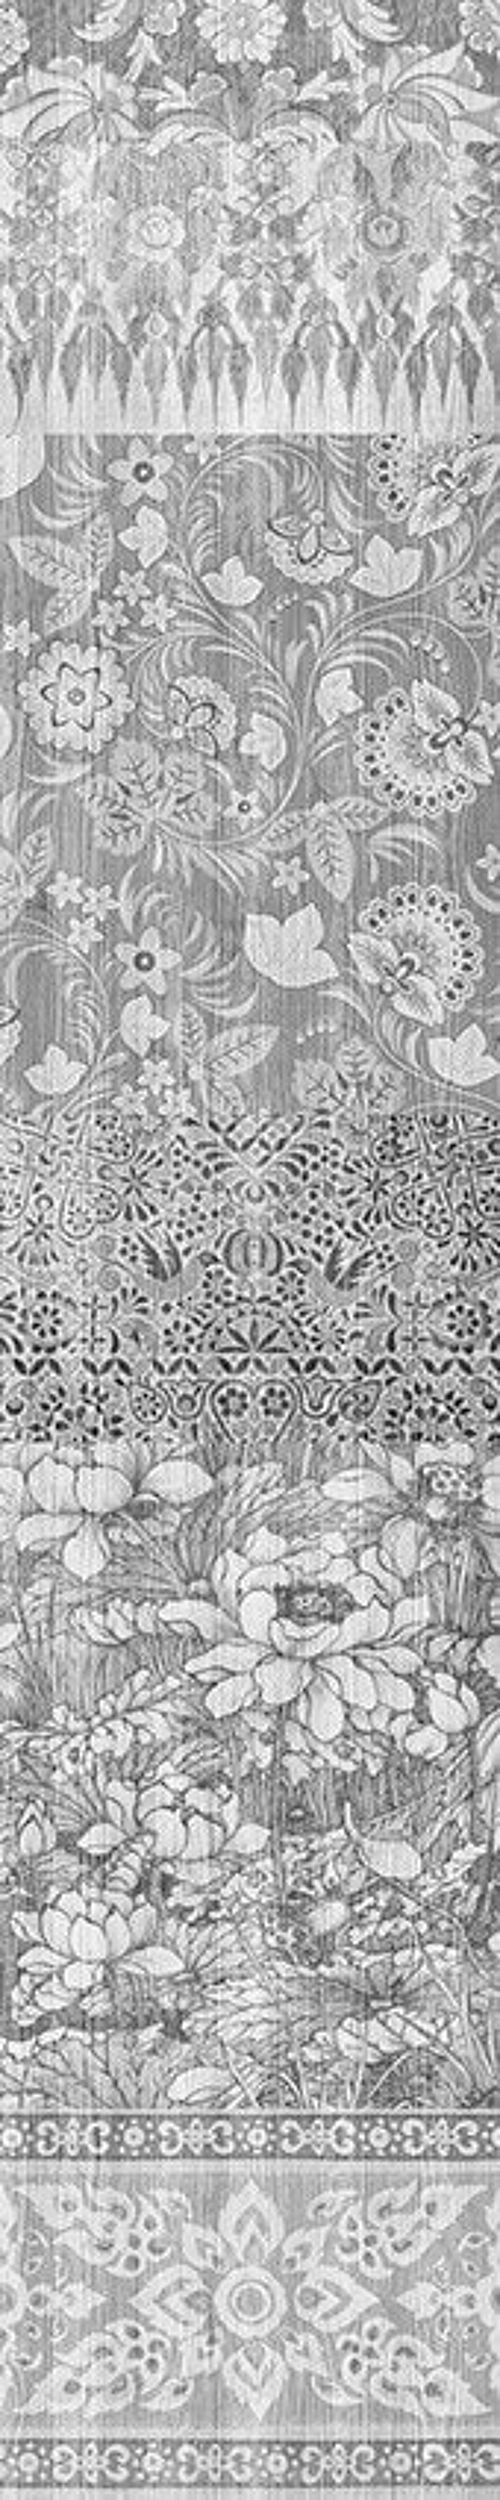 Arts & Crafts Patchwork Wallpaper - Black and White - Panel A